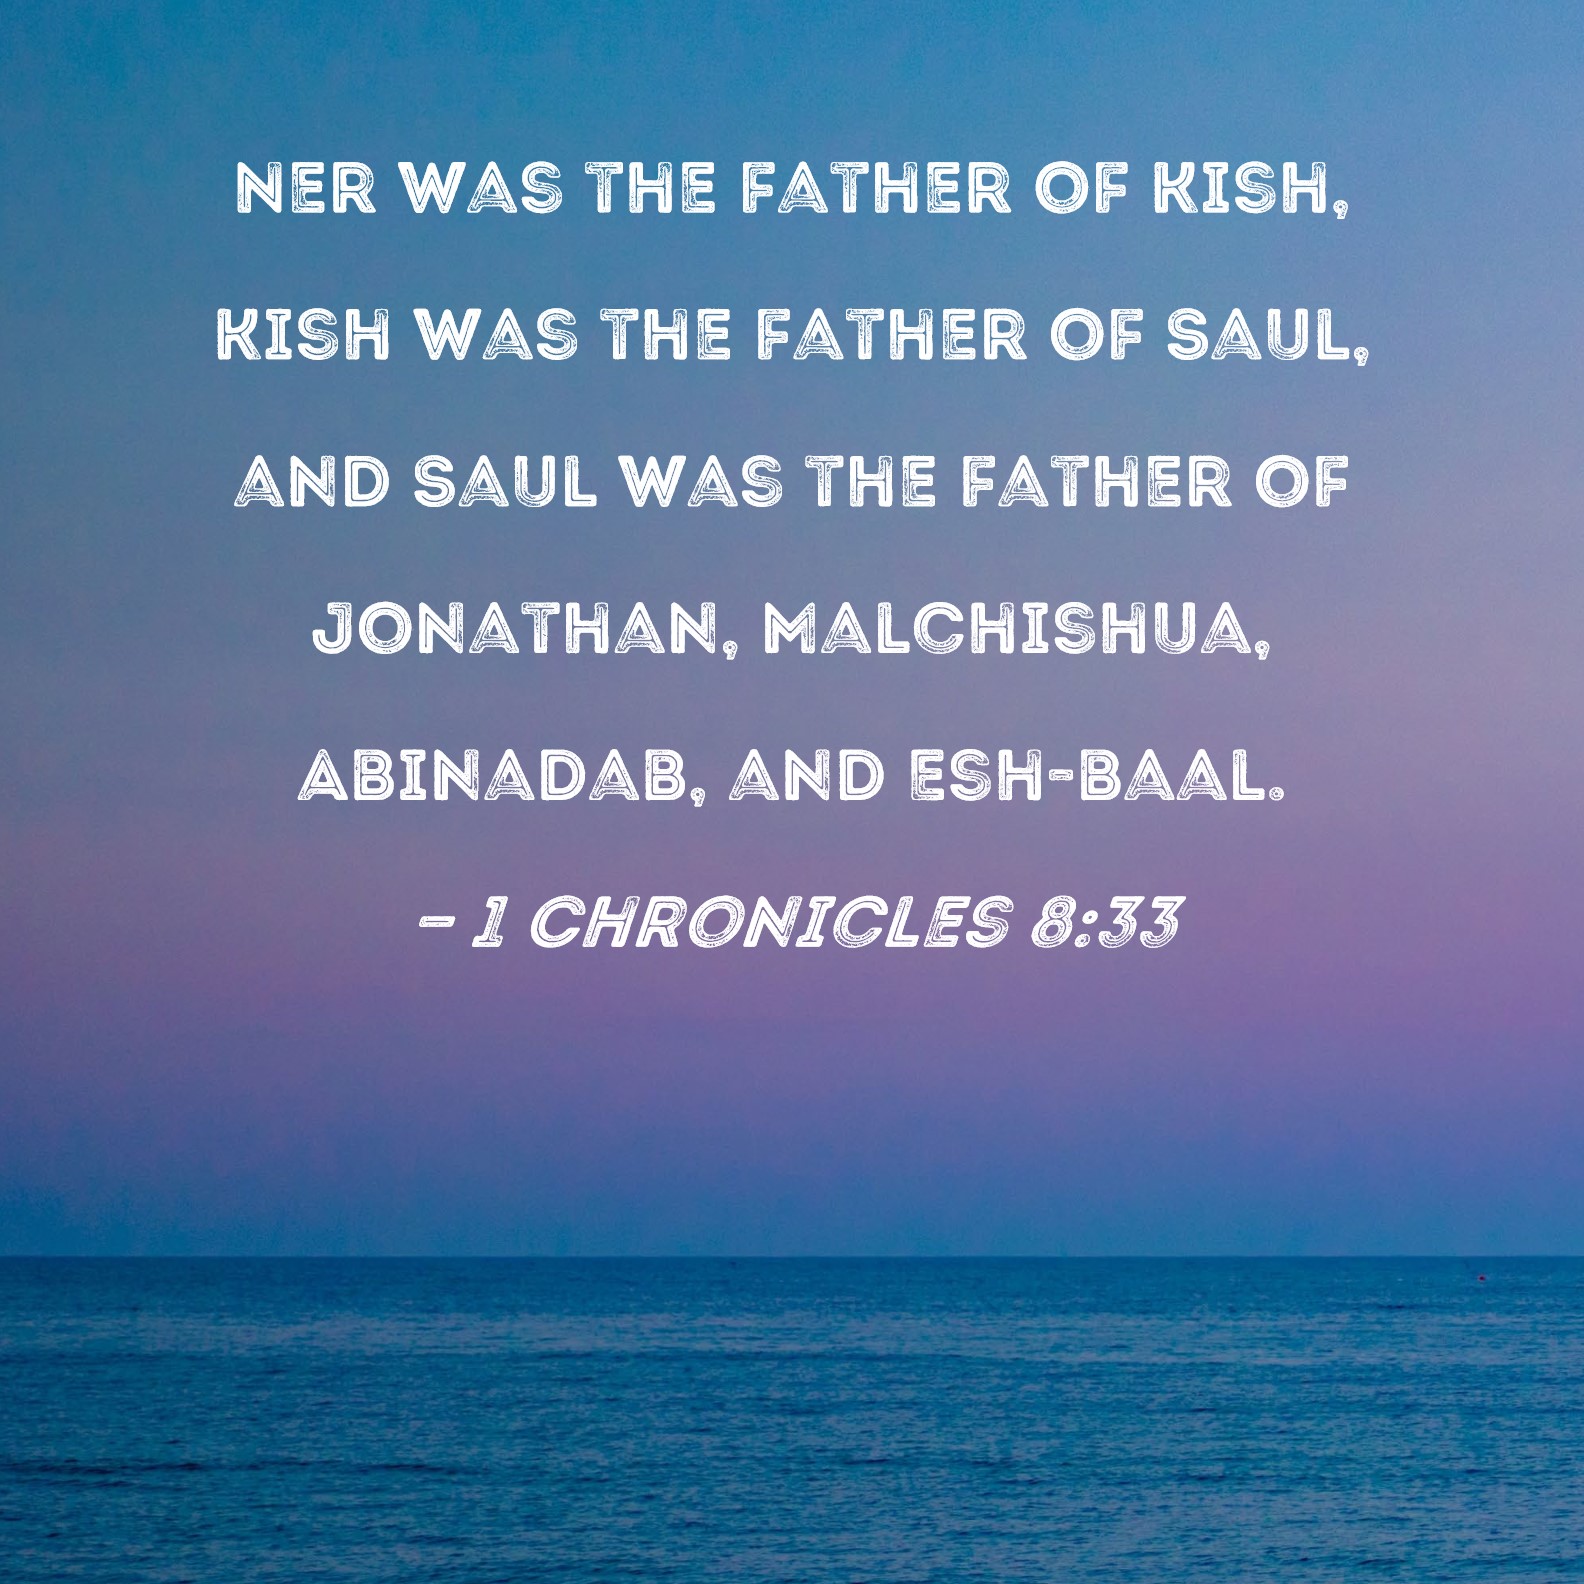 1 Chronicles 8:33 Ner was the father of Kish, Kish was the father 